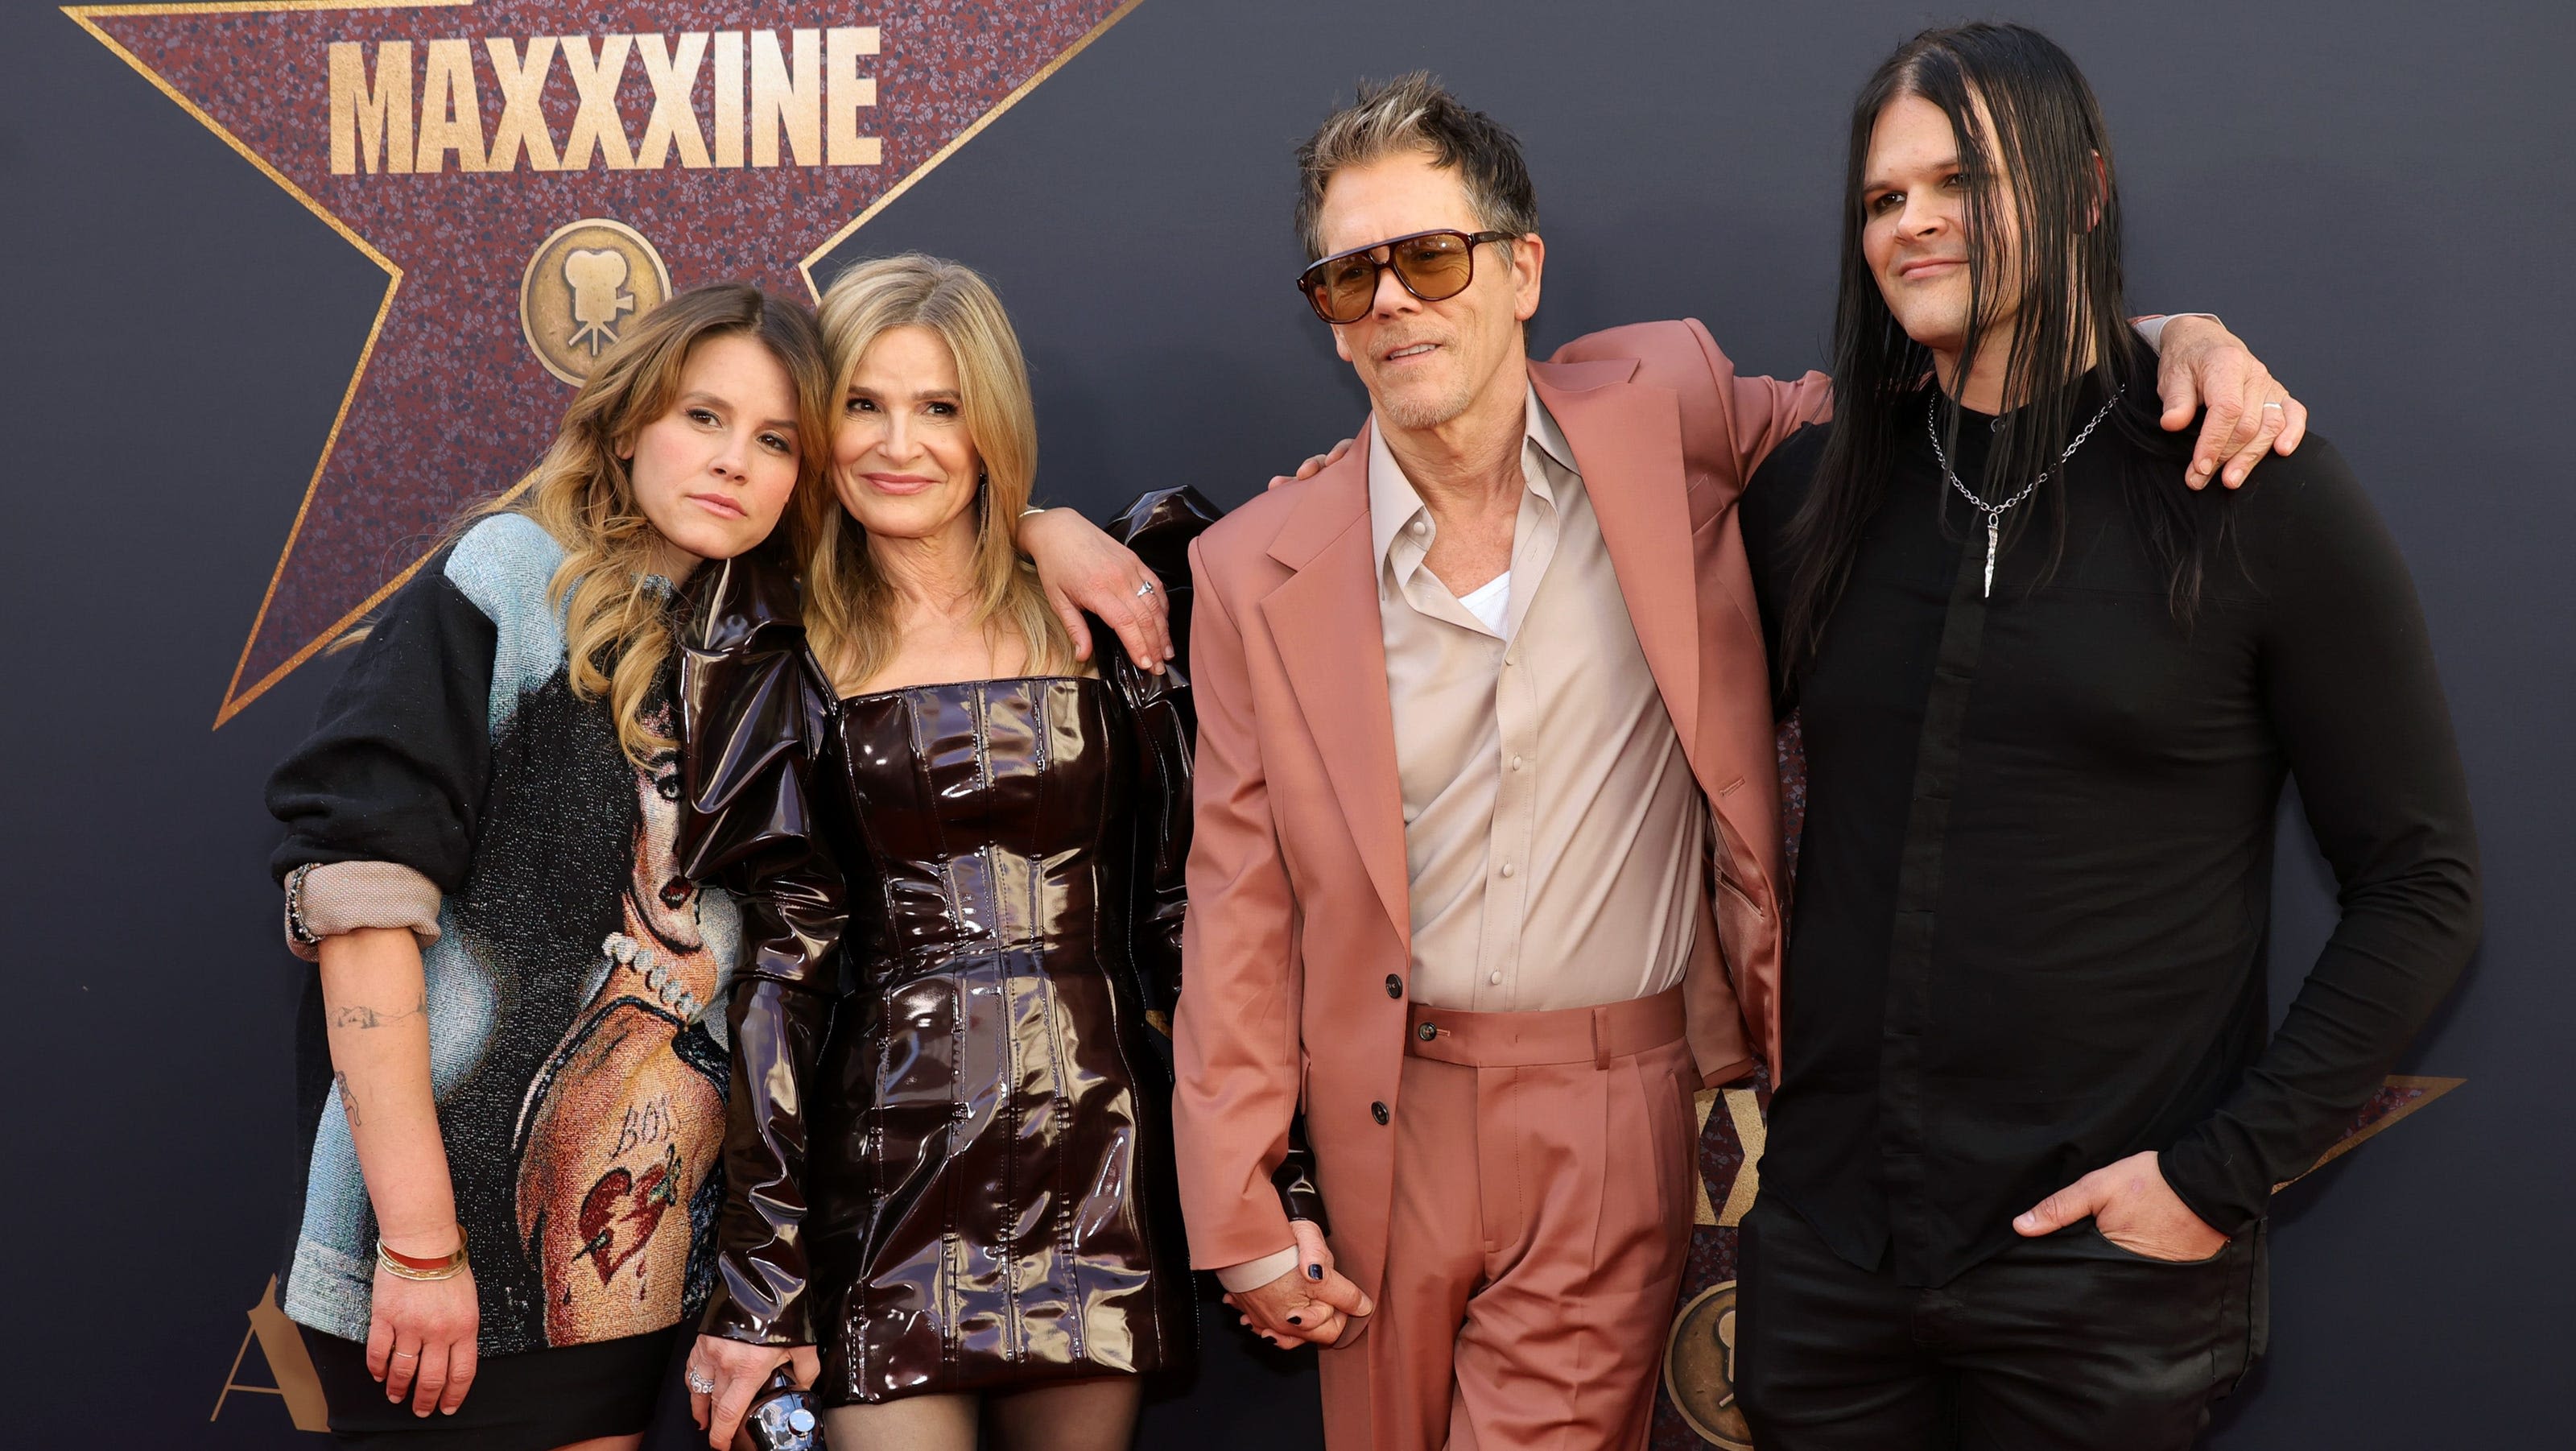 Kevin Bacon, Kyra Sedgwick bring kids Sosie and Travis to 'MaXXXine' premiere: See photos